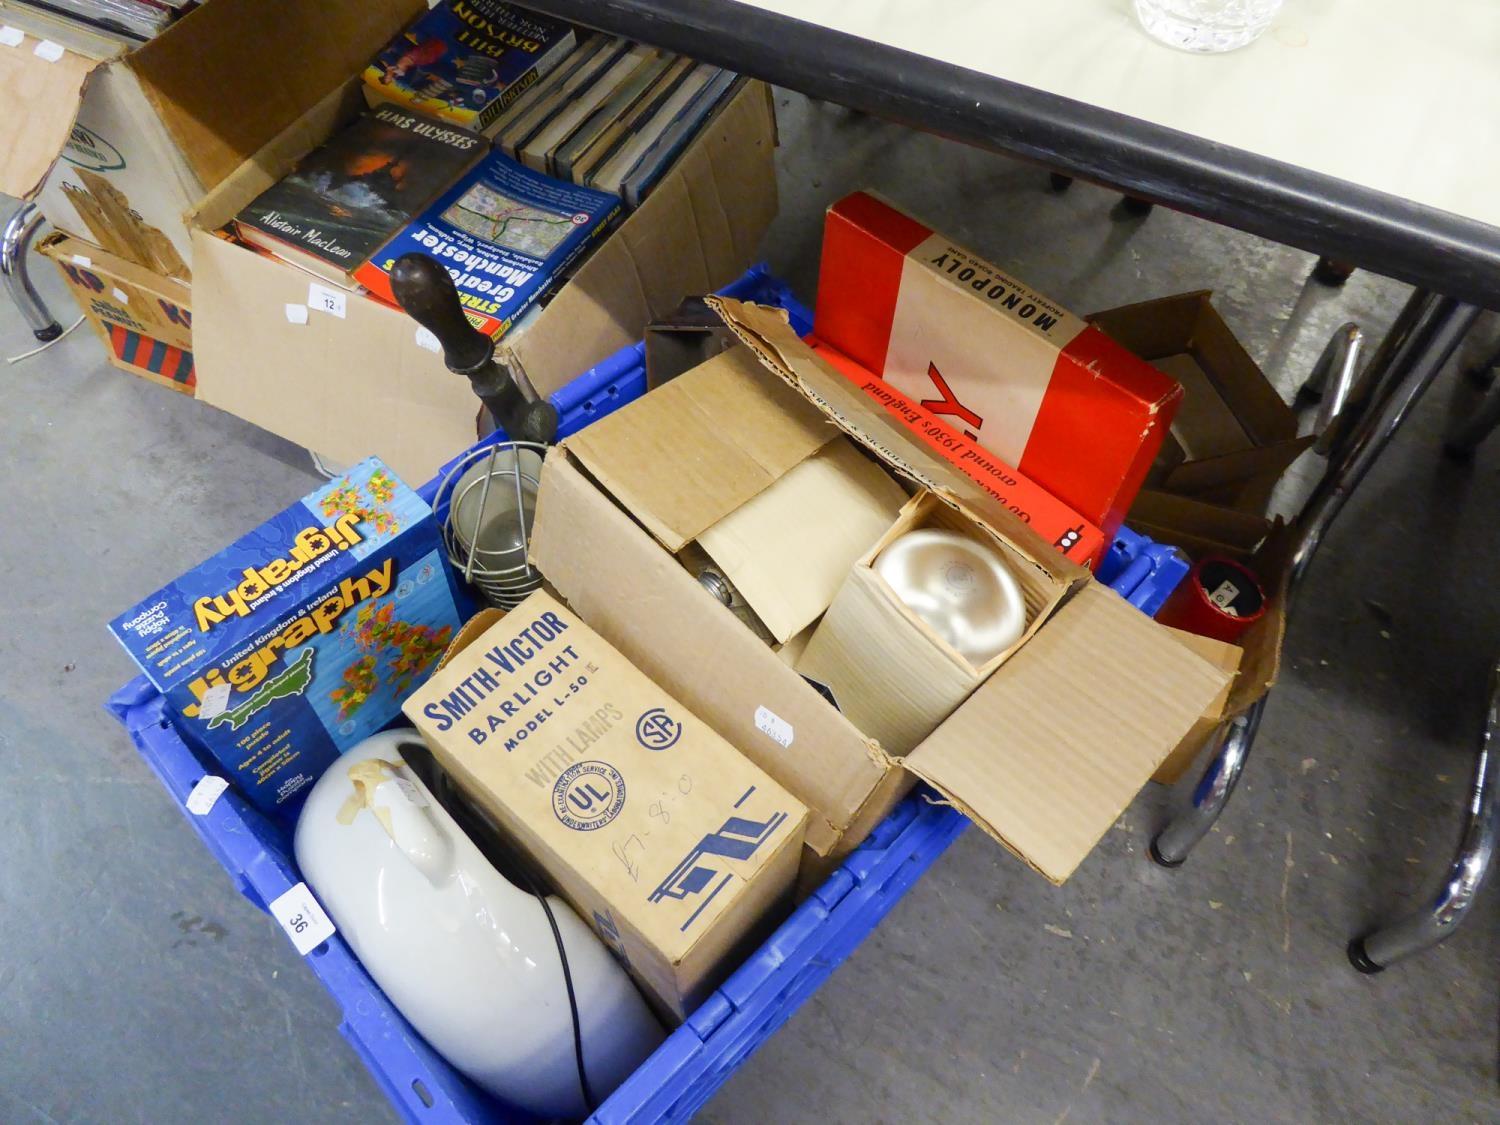 MIXED LOT - TO INCLUDE VARIOUS BOARD GAMES, POLAROID CAMERA, TWO SETS OF BATHROOM SCALES, LARGE